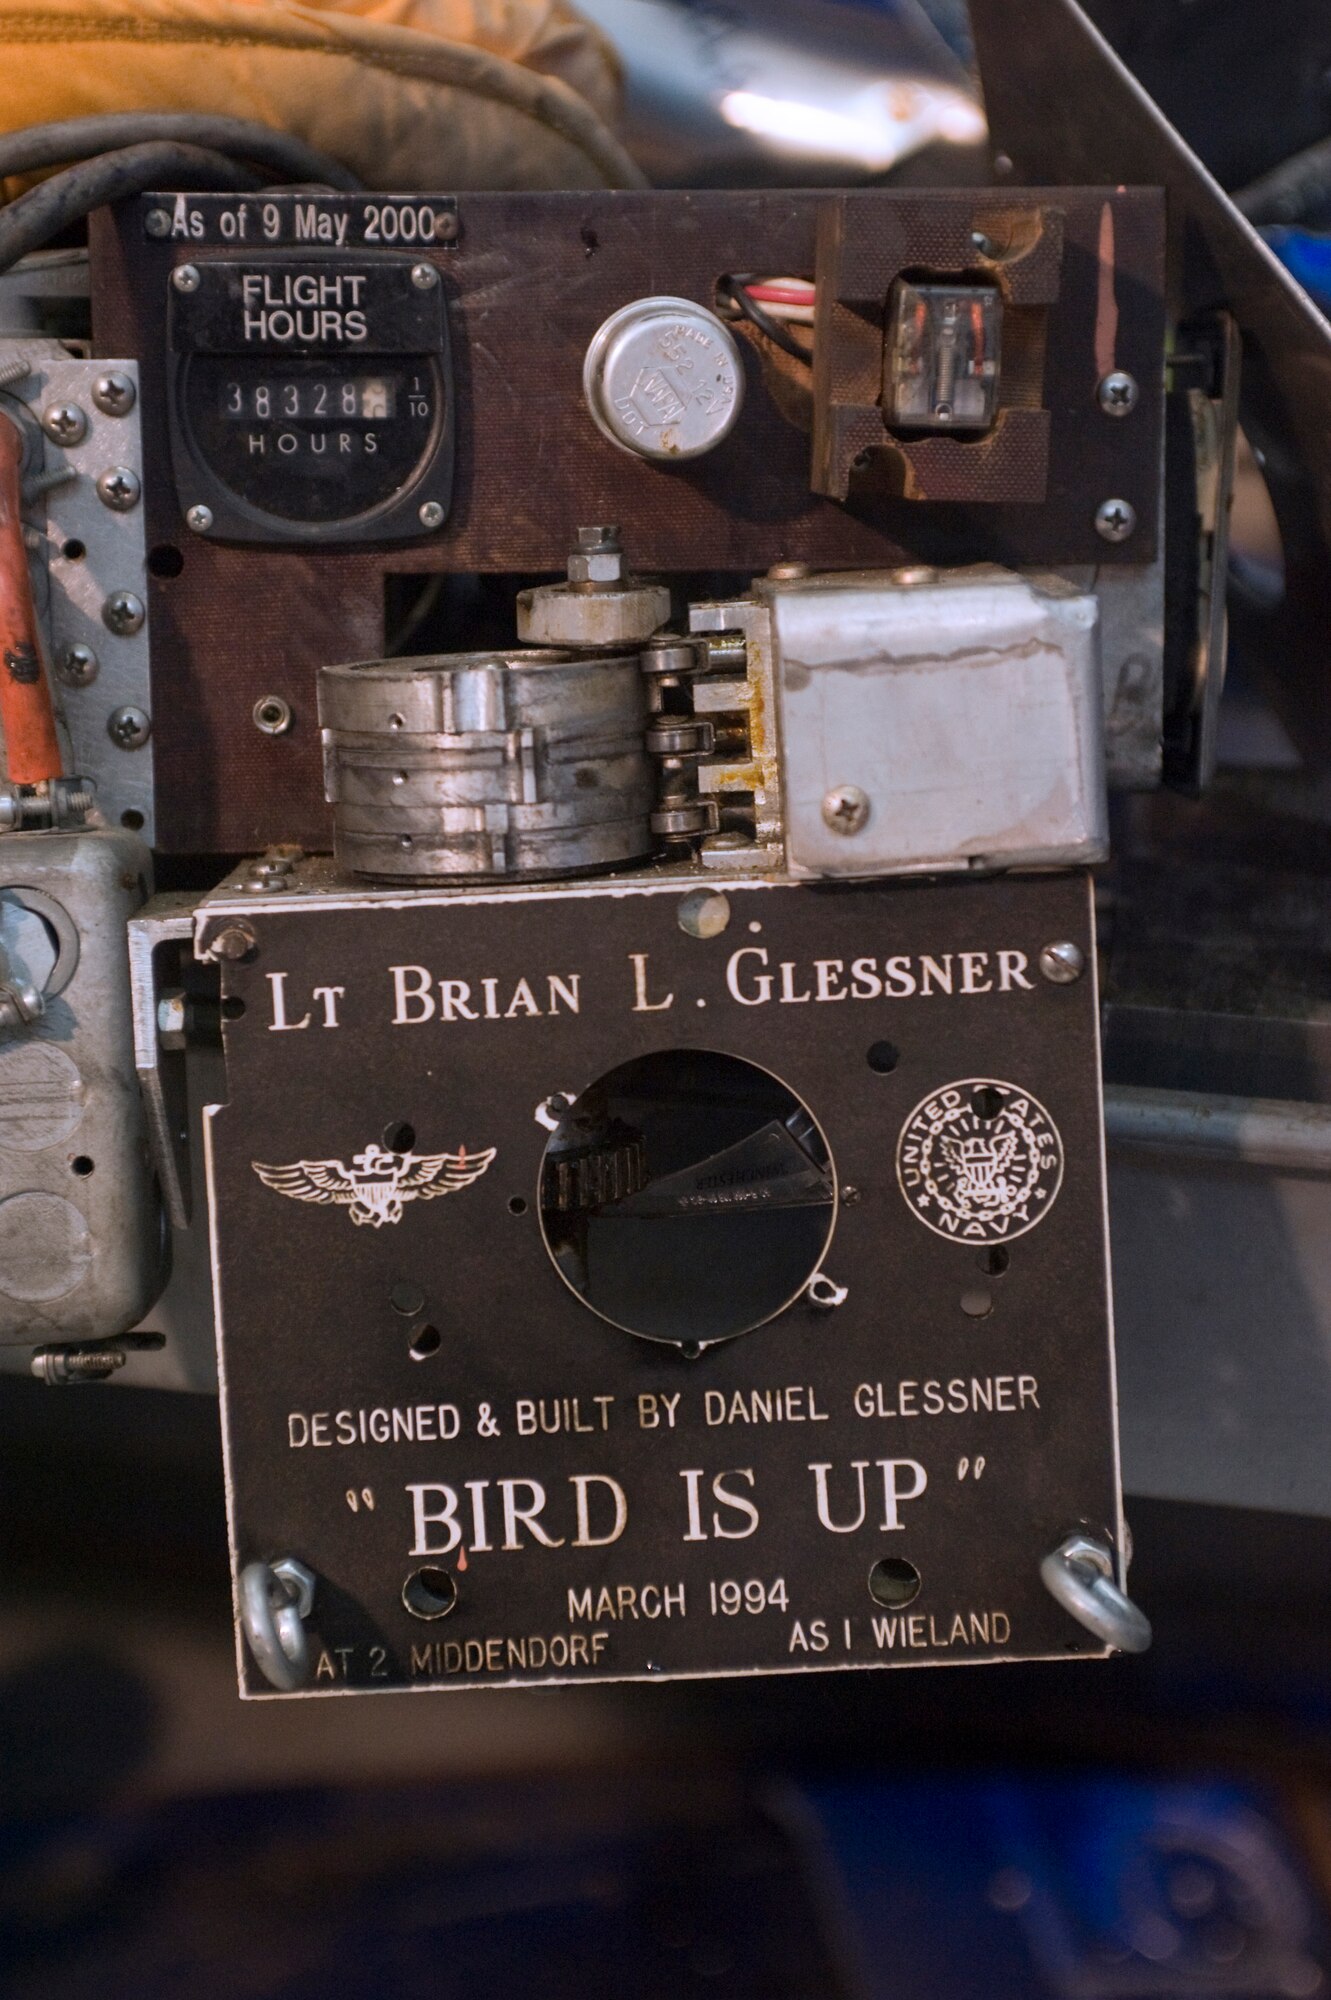 Flight hour recorder displays 38,328 actual flight hours logged by the then Lt. Brian L. Glessner.  (Photo/Bobby Jones)